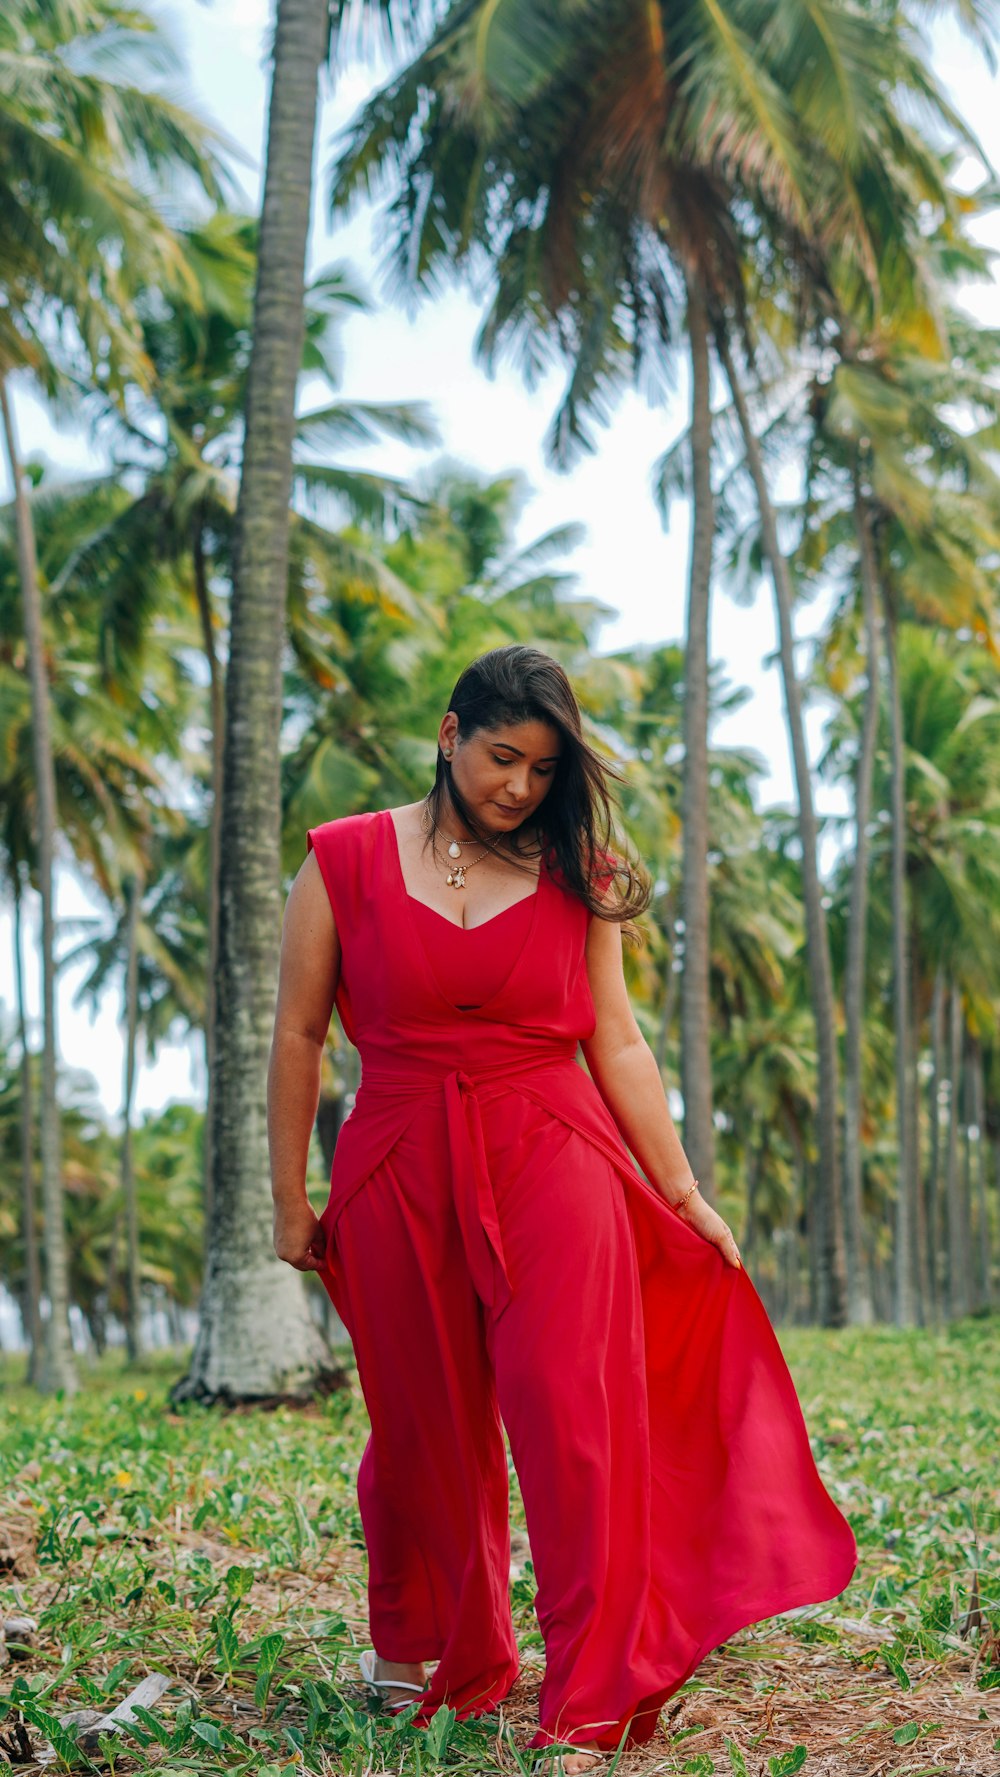 woman in red sleeveless dress standing near palm trees during daytime